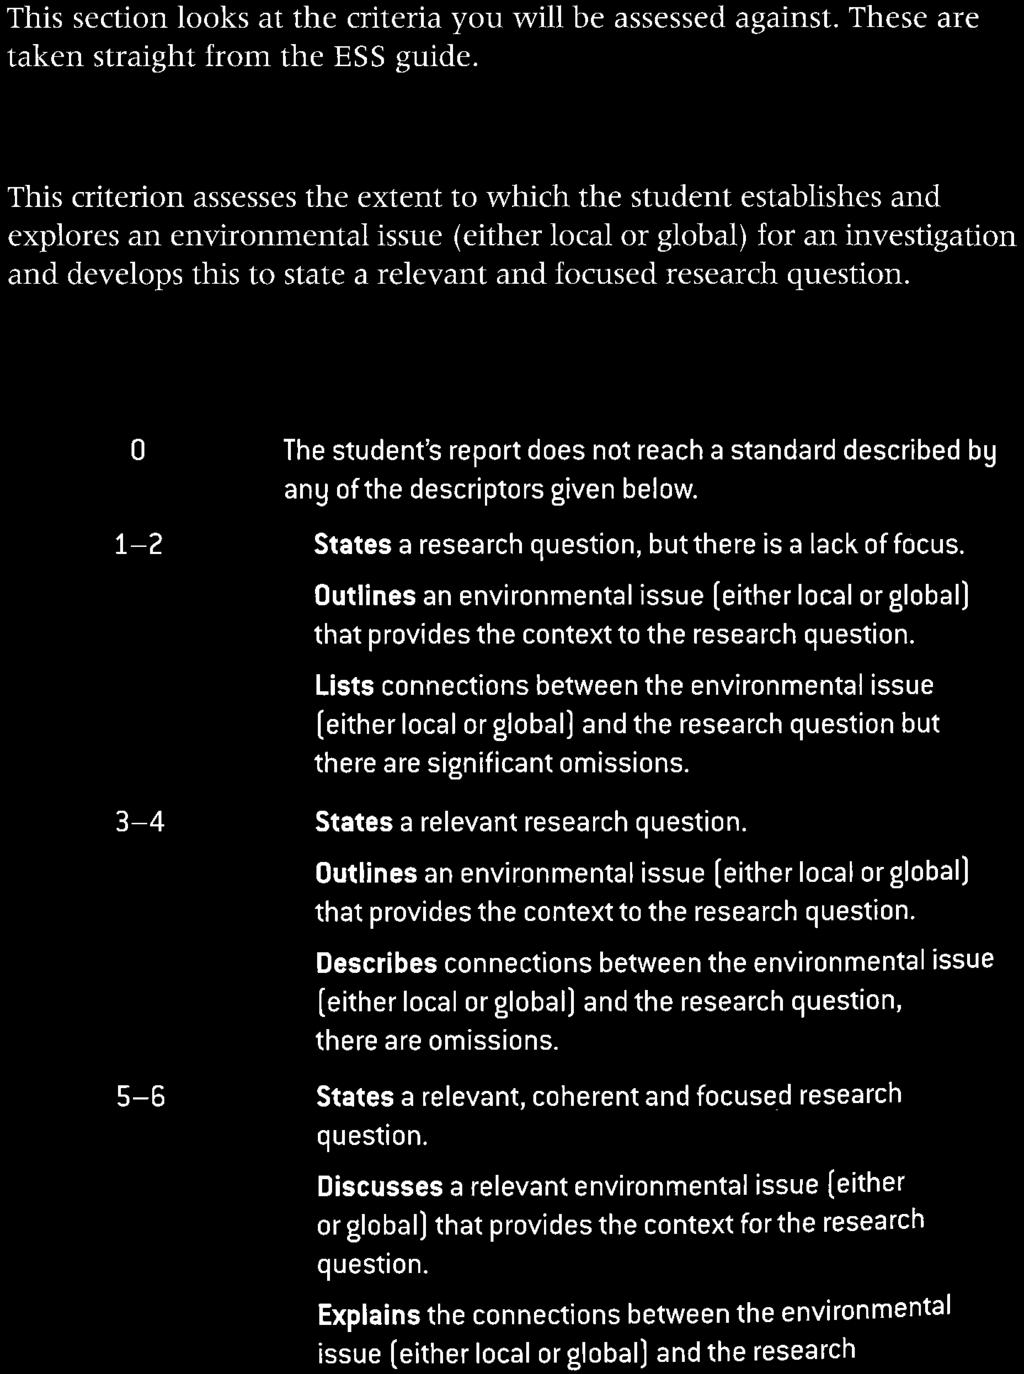 This criterion assesses the extent to which the student establishes and explores an environmental issue (either local or global) for an investigation and develops this to state a relevant and focused